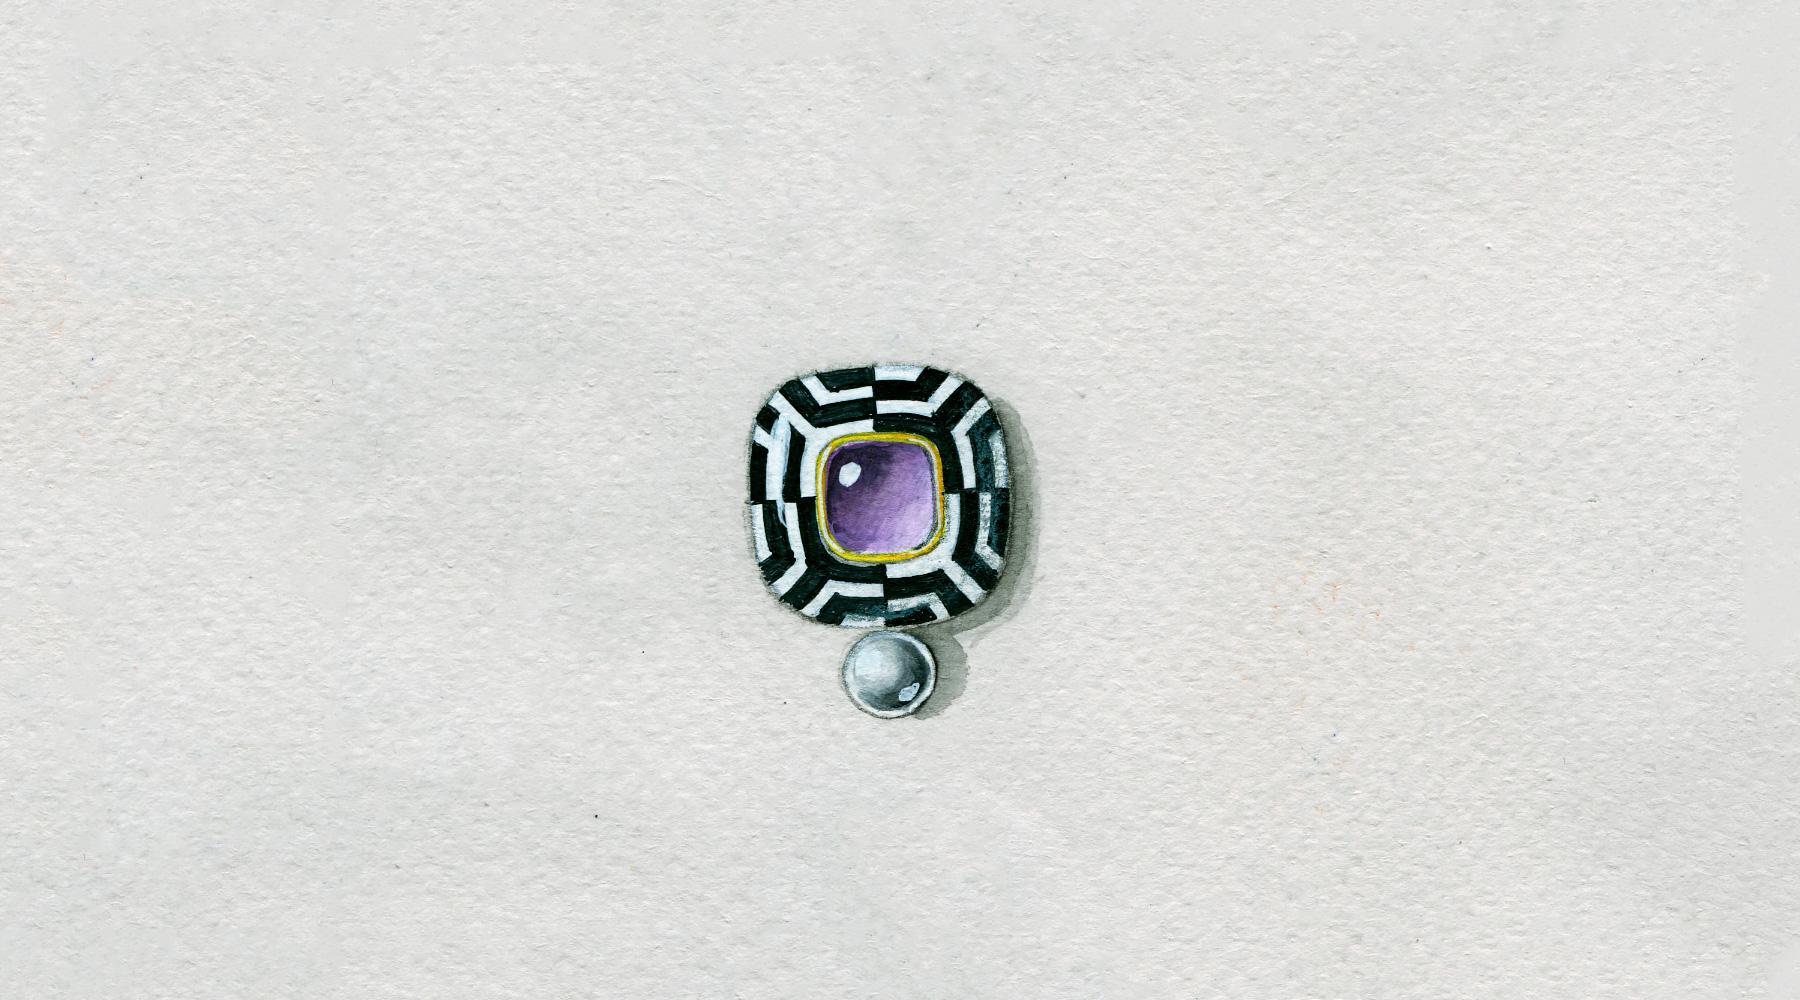 Bodyfurnitures Stud Earrings, Hypnotic Black and White, Amethyst, Pearl, Silver In New Condition For Sale In Bolzano, BZ